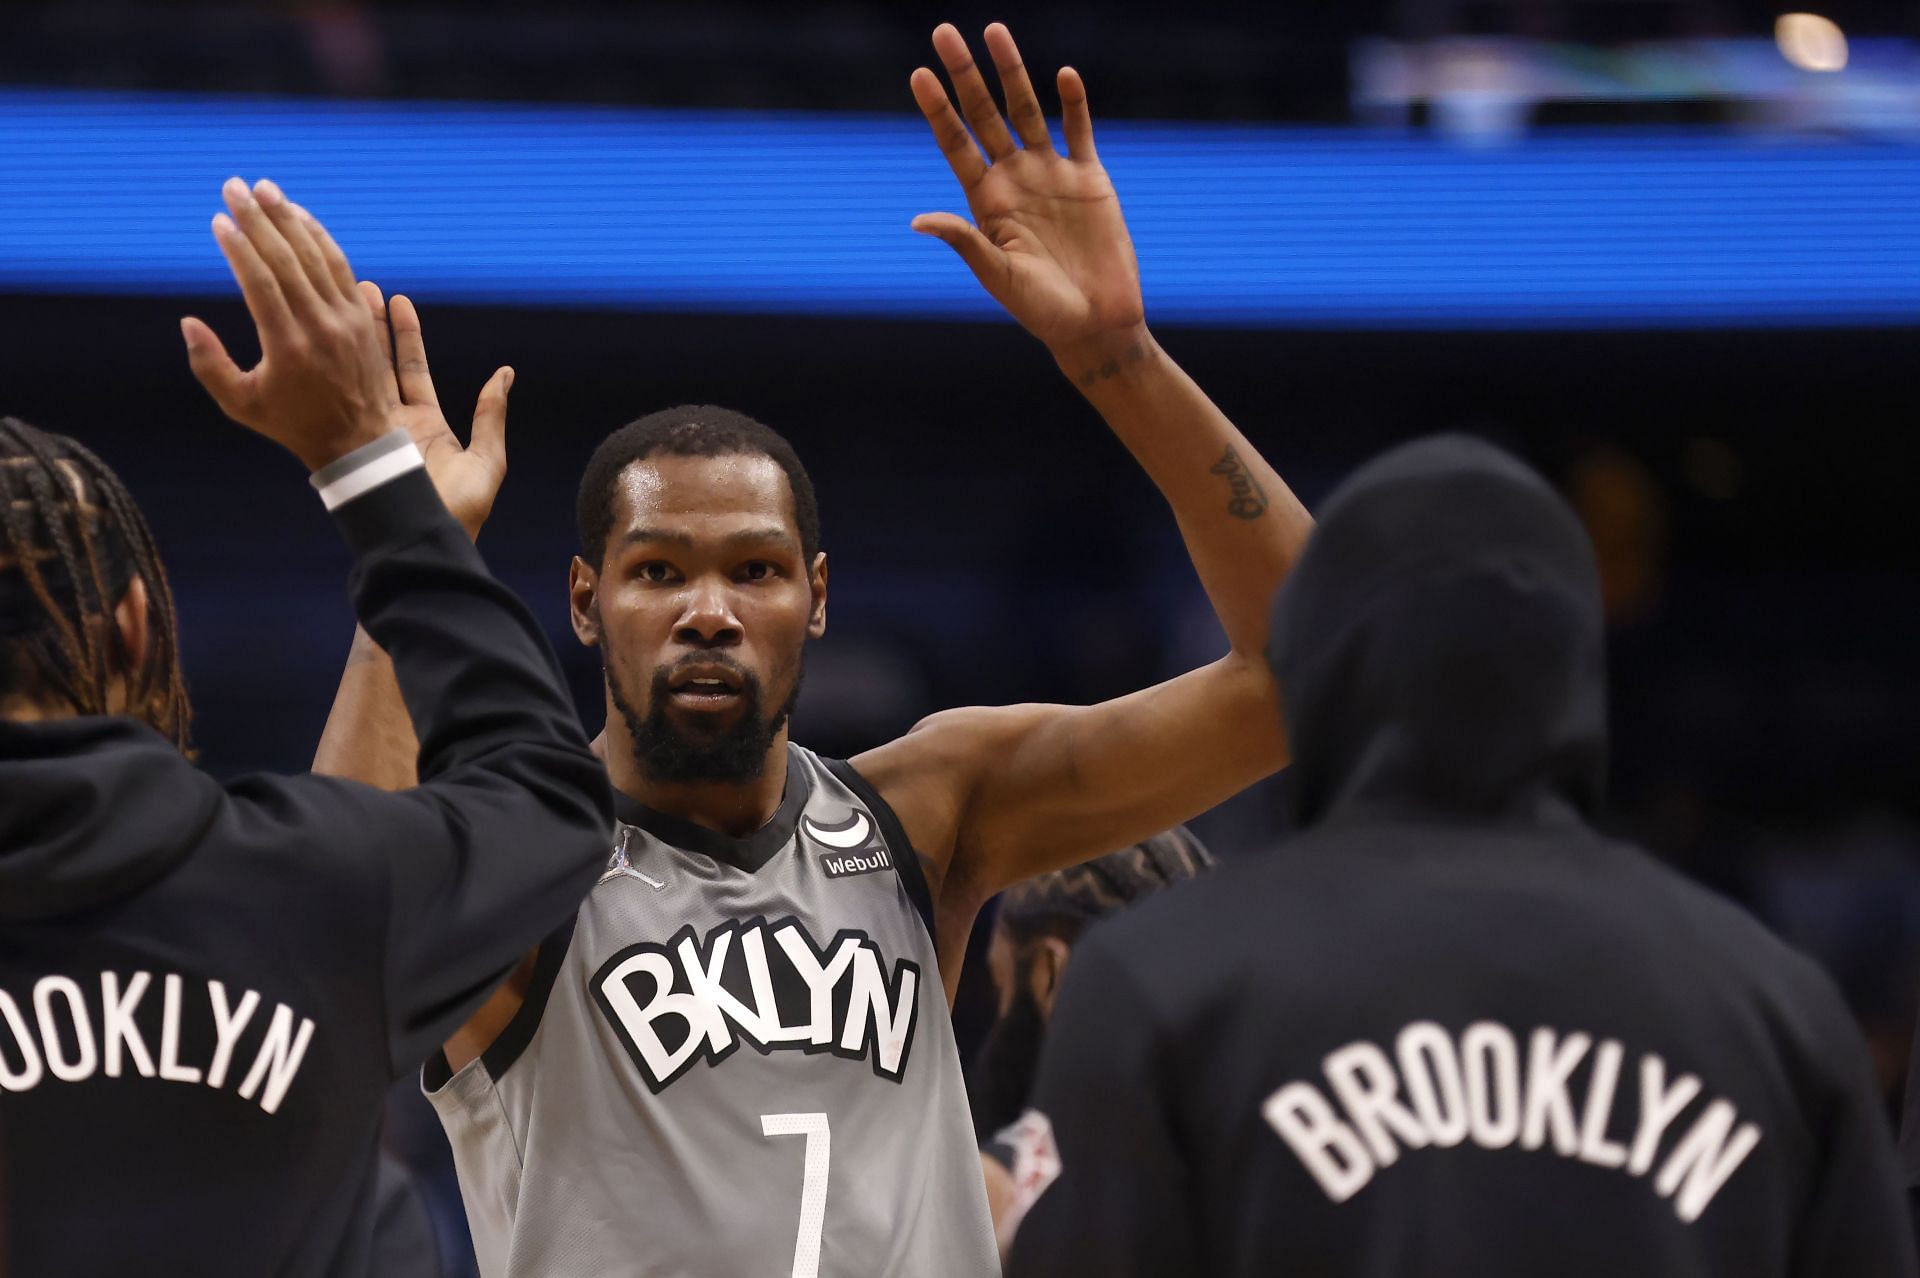 Kevin Durant celebrates a play as the Brooklyn Nets go into the huddle.